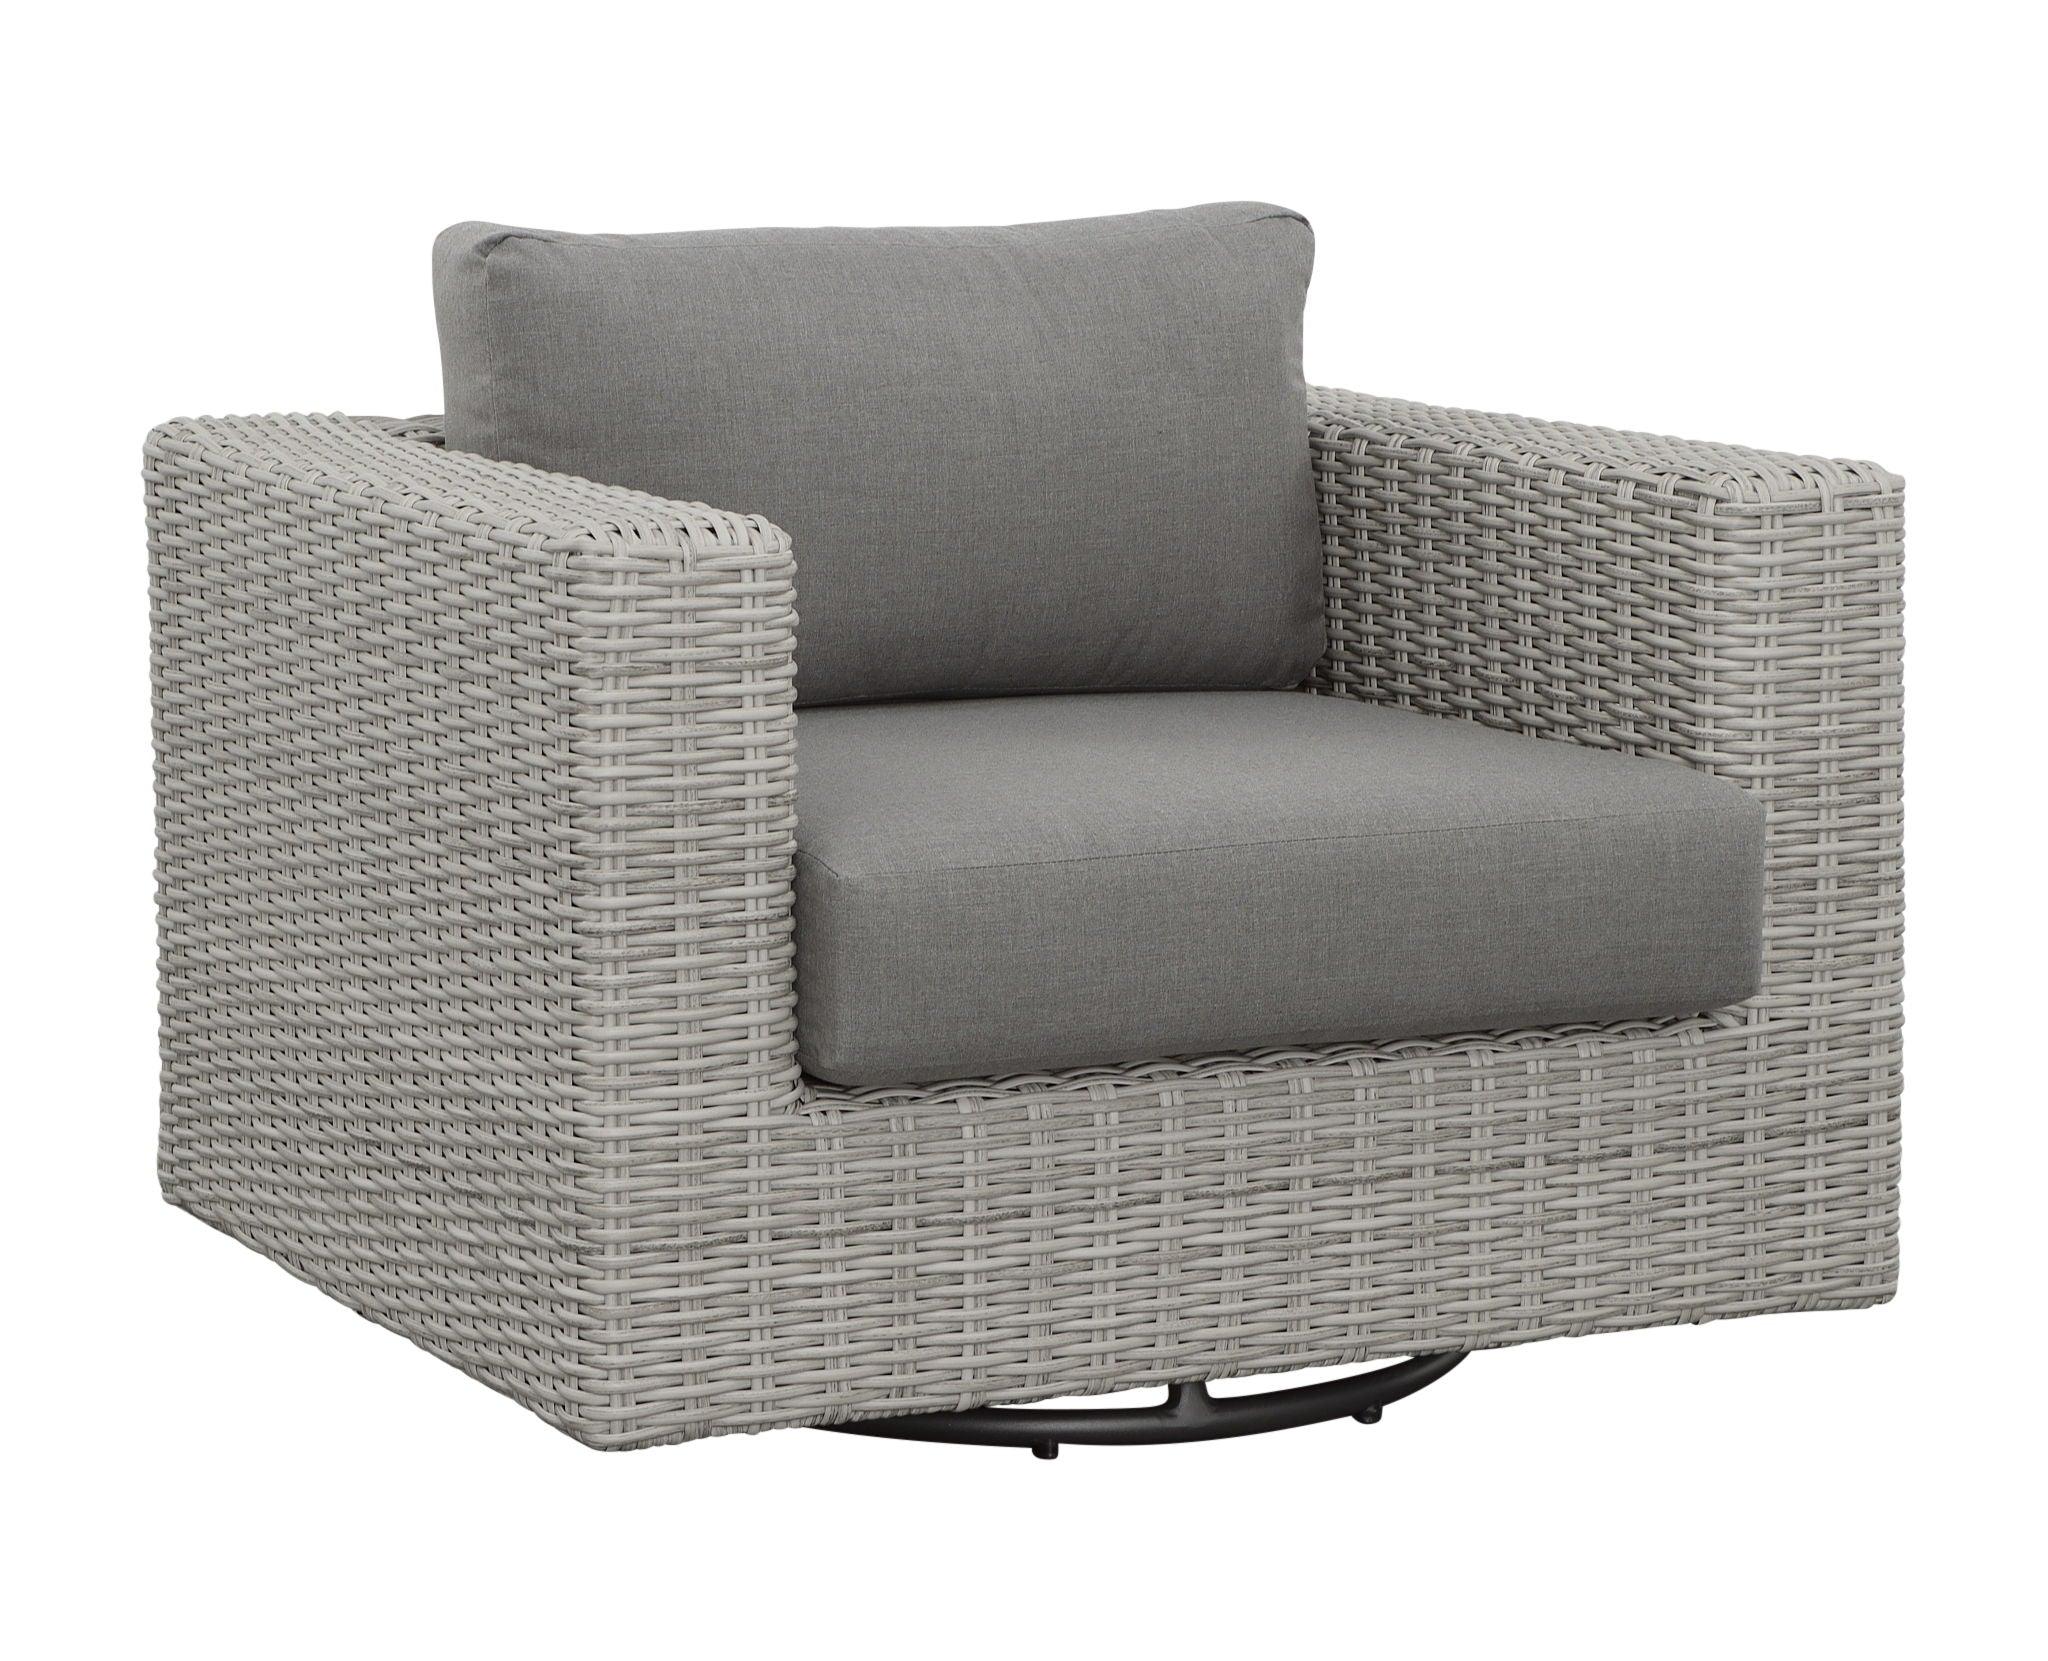 Steve Silver Furniture - Blakley - Outdoor Swilvel Chair (Set of 2) With Half Round Wicker - Gray - 5th Avenue Furniture